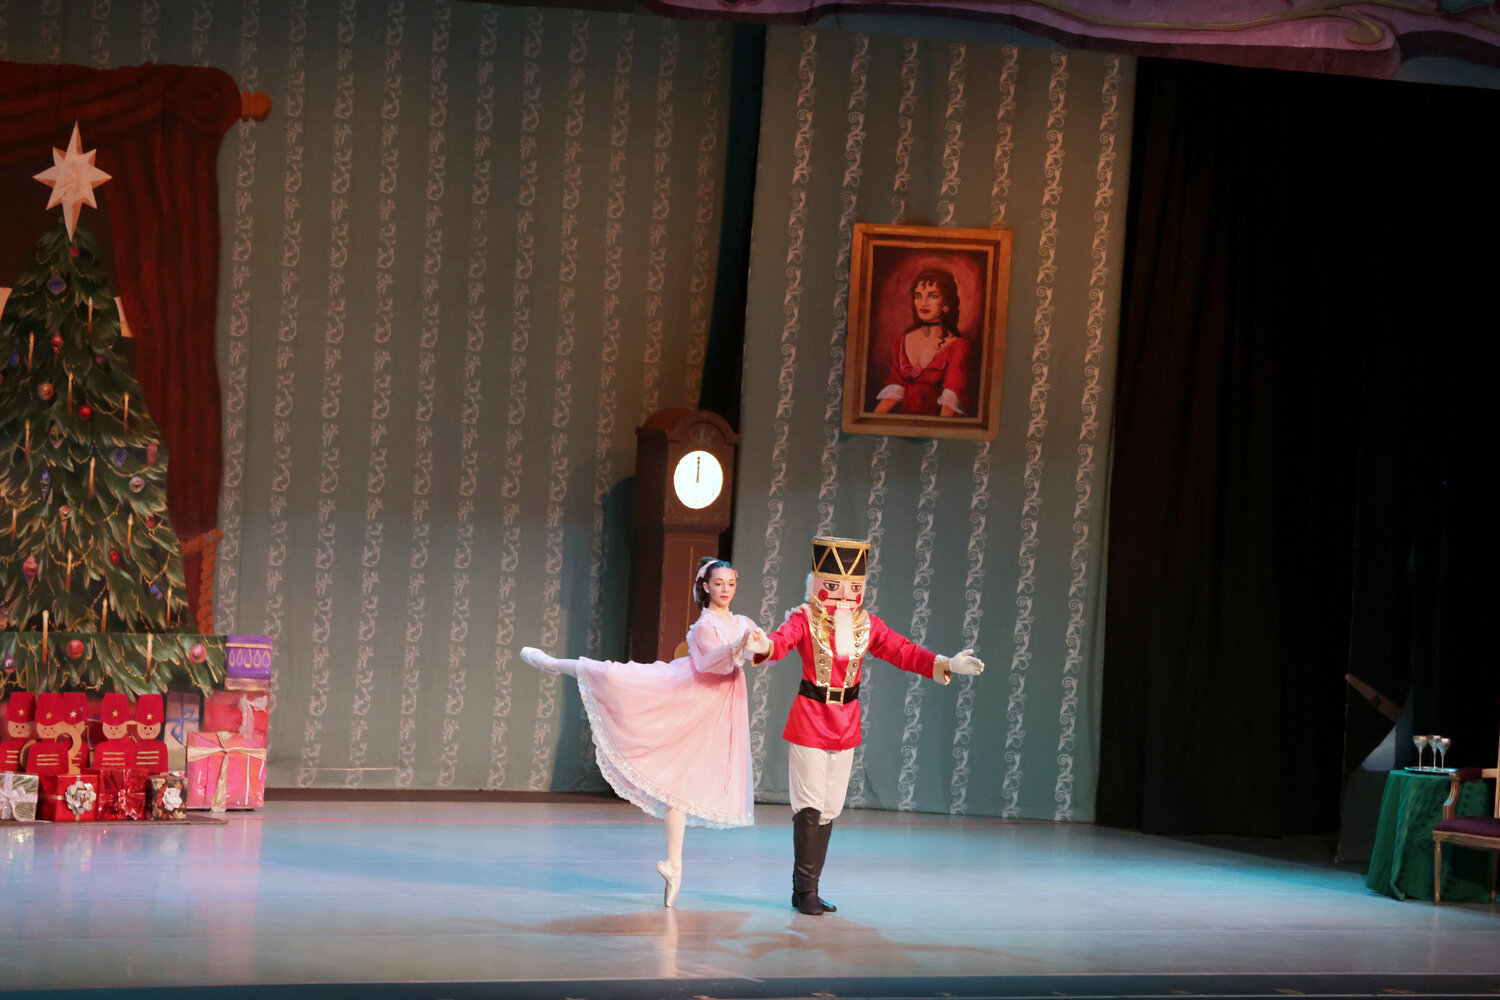 The Eastern Shore Ballet Theatre will present live performances of "The Nutcracker" Dec. 1 to 3 at Wicomico High School.